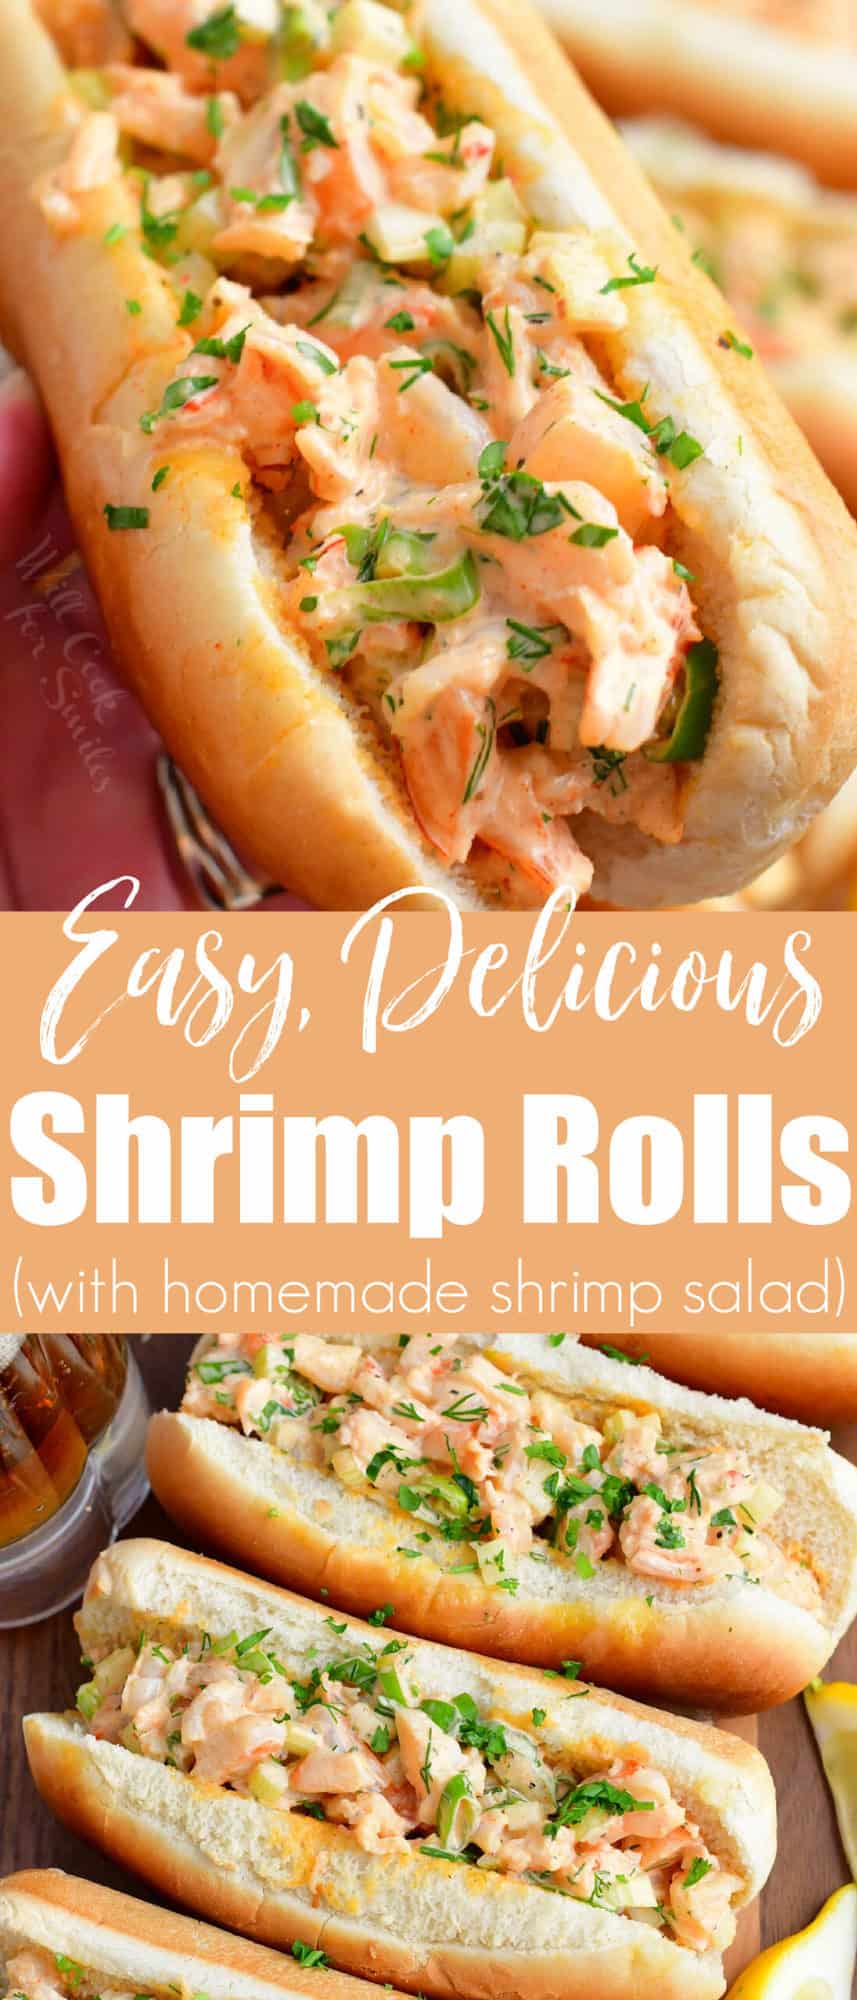 title collage of two images of shrimp rolls sandwiches and title in the middle